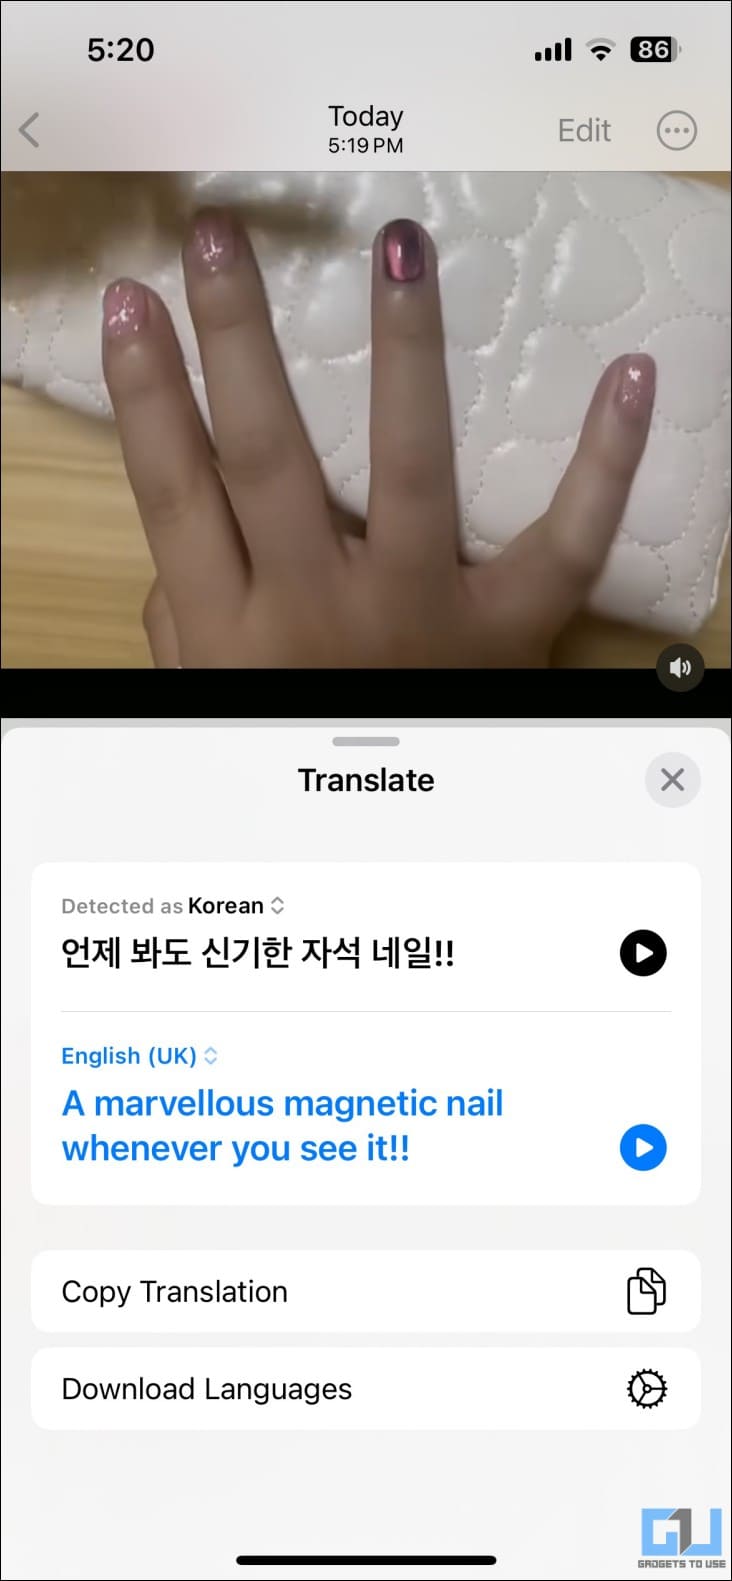 Instagram content translated from Korean to English